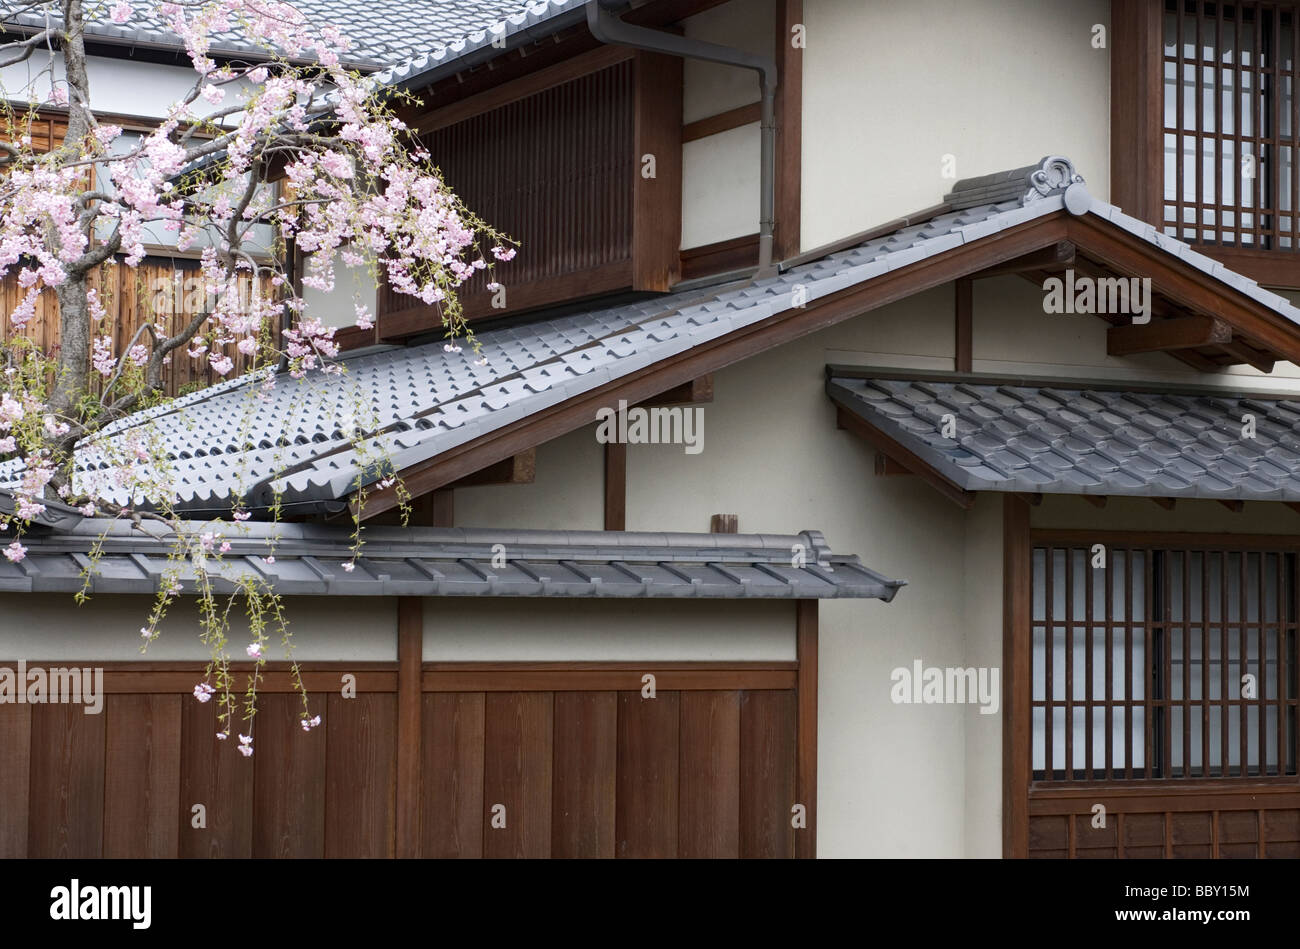 An upscale two story single family Japanese residence with multiple roof lines and traditional detailing Stock Photo